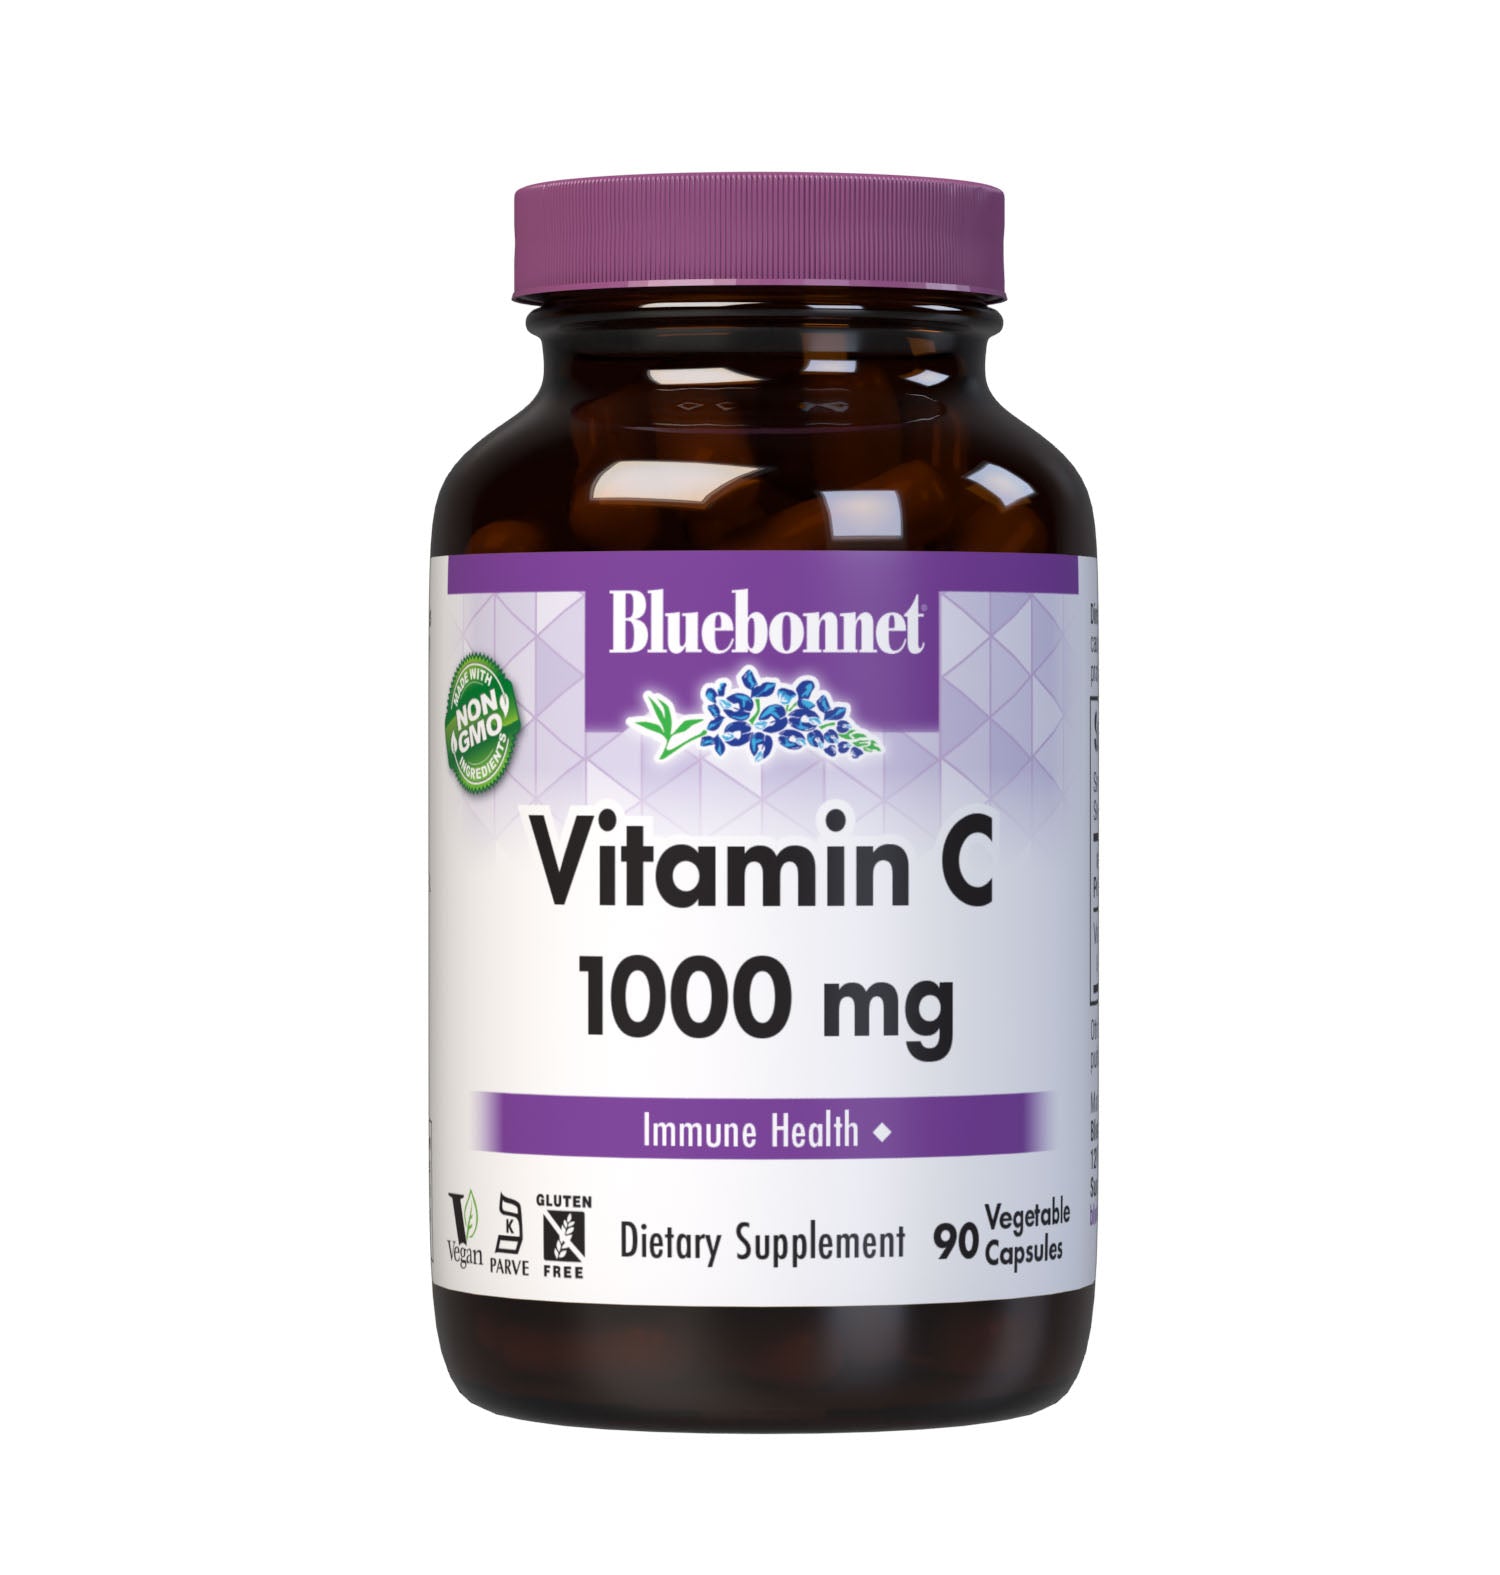 Bluebonnet Nutrition's Vitamin C-1000 mg 90 Vegetable Capsules are formulated with non-GMO, identity-preserved (IP) vitamin C from L-ascorbic acid to help support immune function. #size_90 count